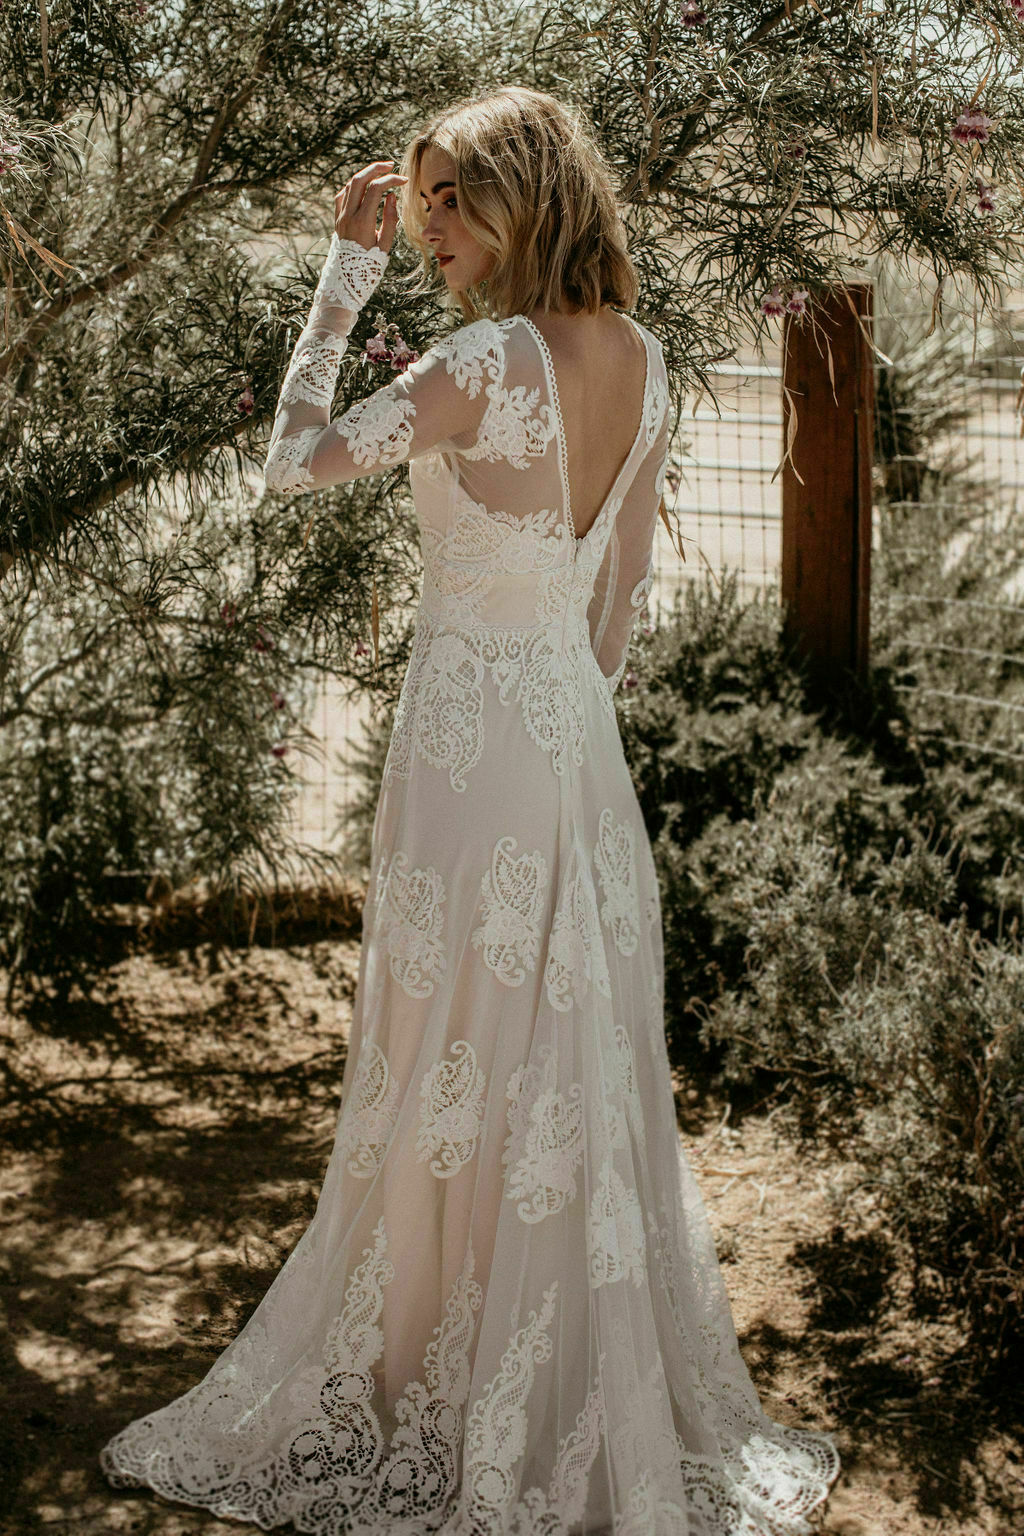 Celeste Lace Bohemian Wedding Dress | Dreamers and Lovers